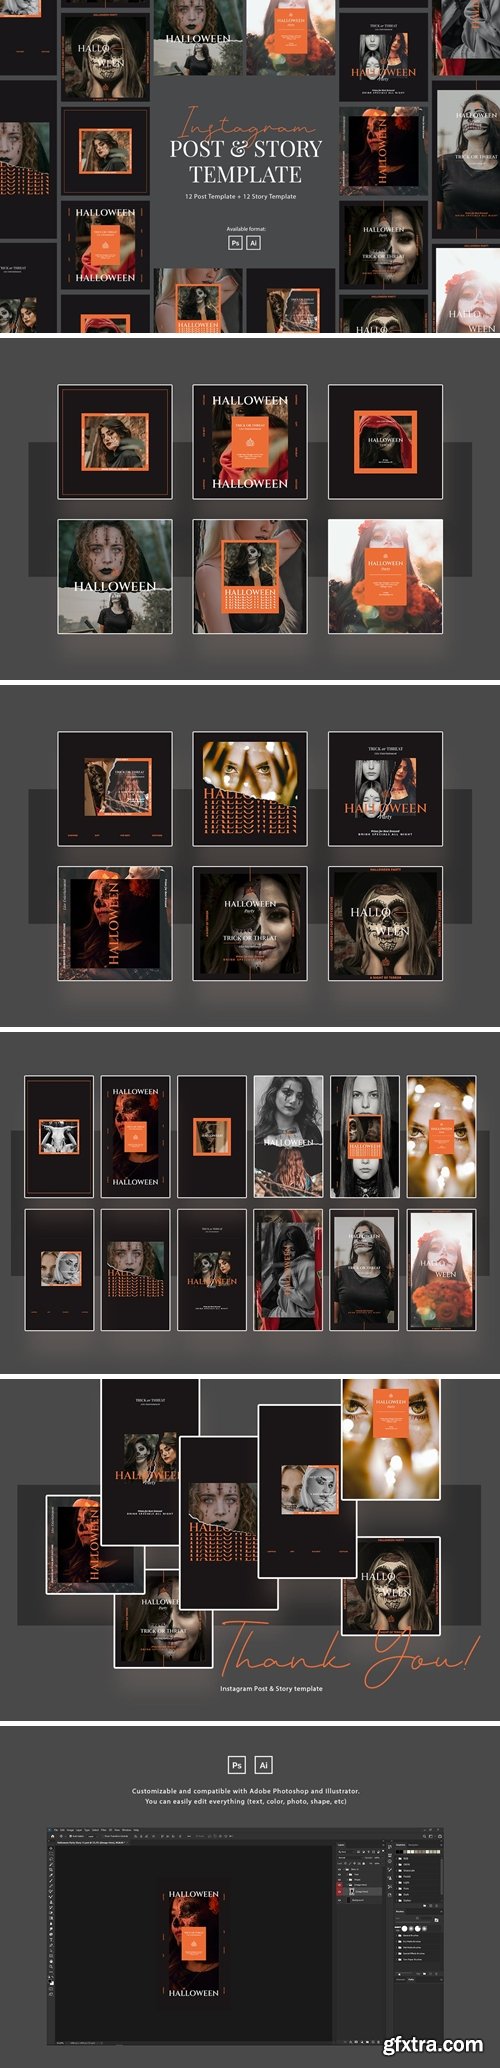 Halloween Party Instagram Post & Story Template